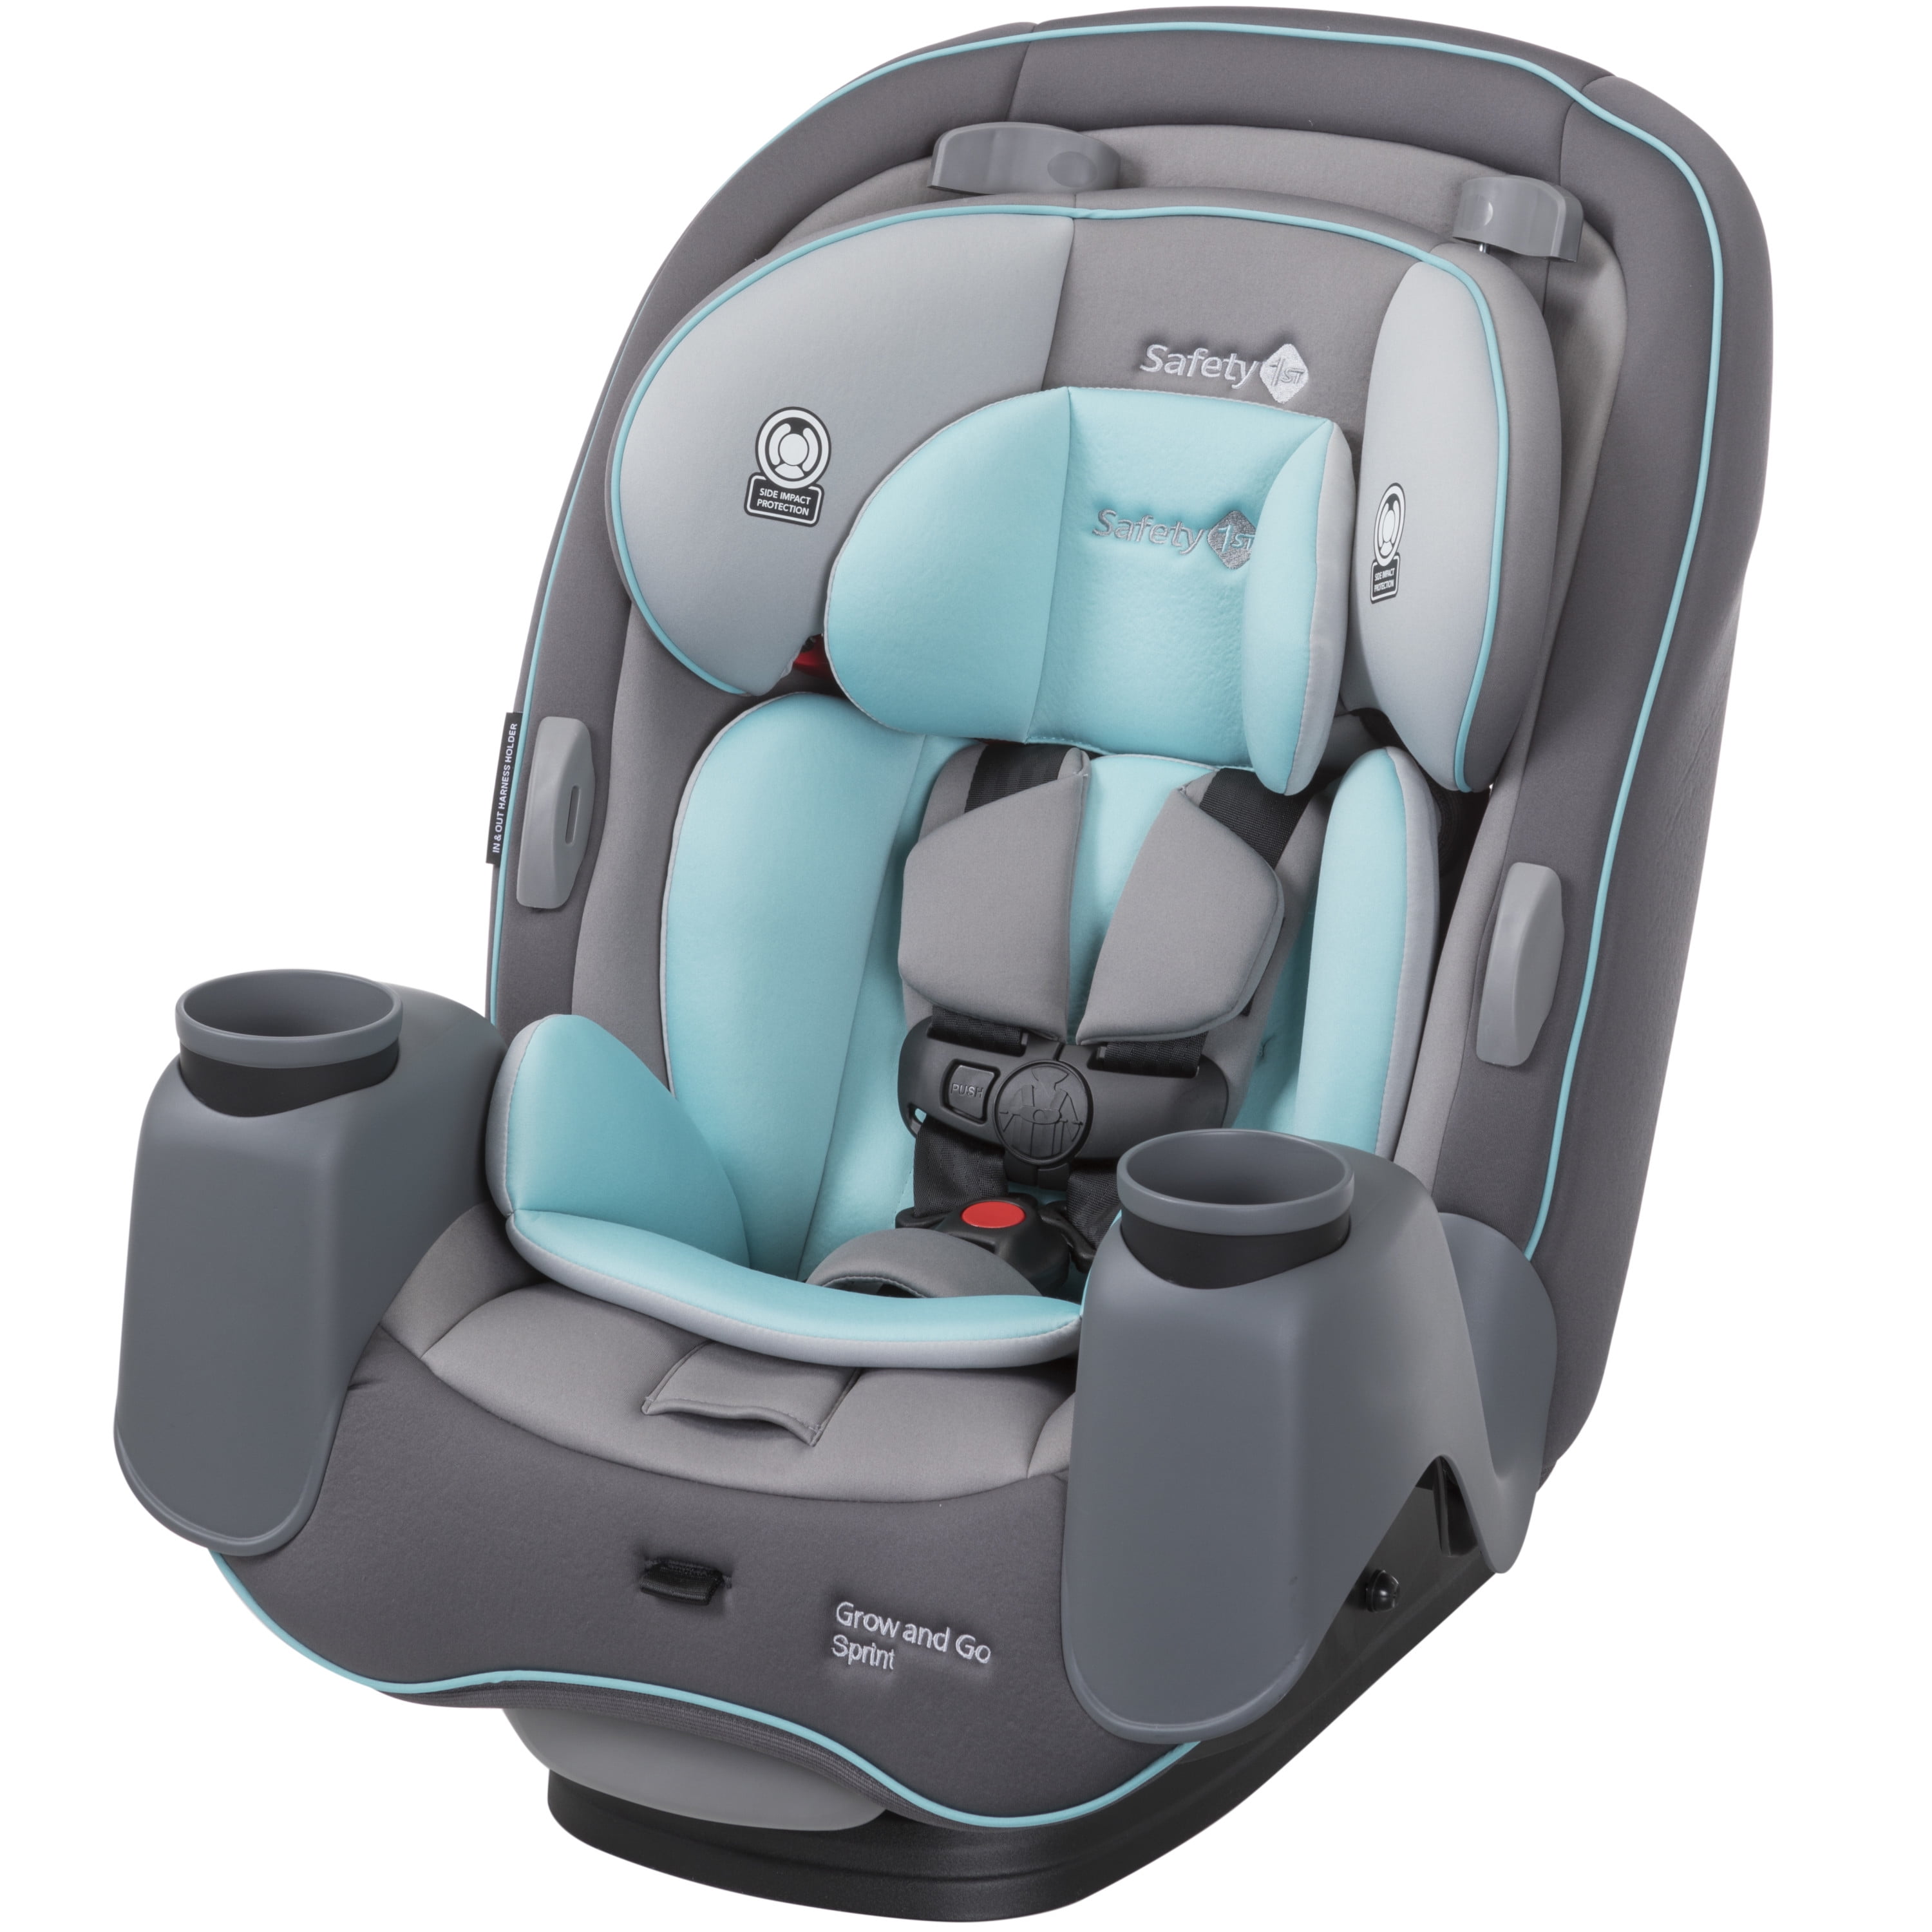 Safety 1st Grow And Go Sprint All In 1, Safety 1st Grow And Go 3 In 1 Convertible Car Seat Rating